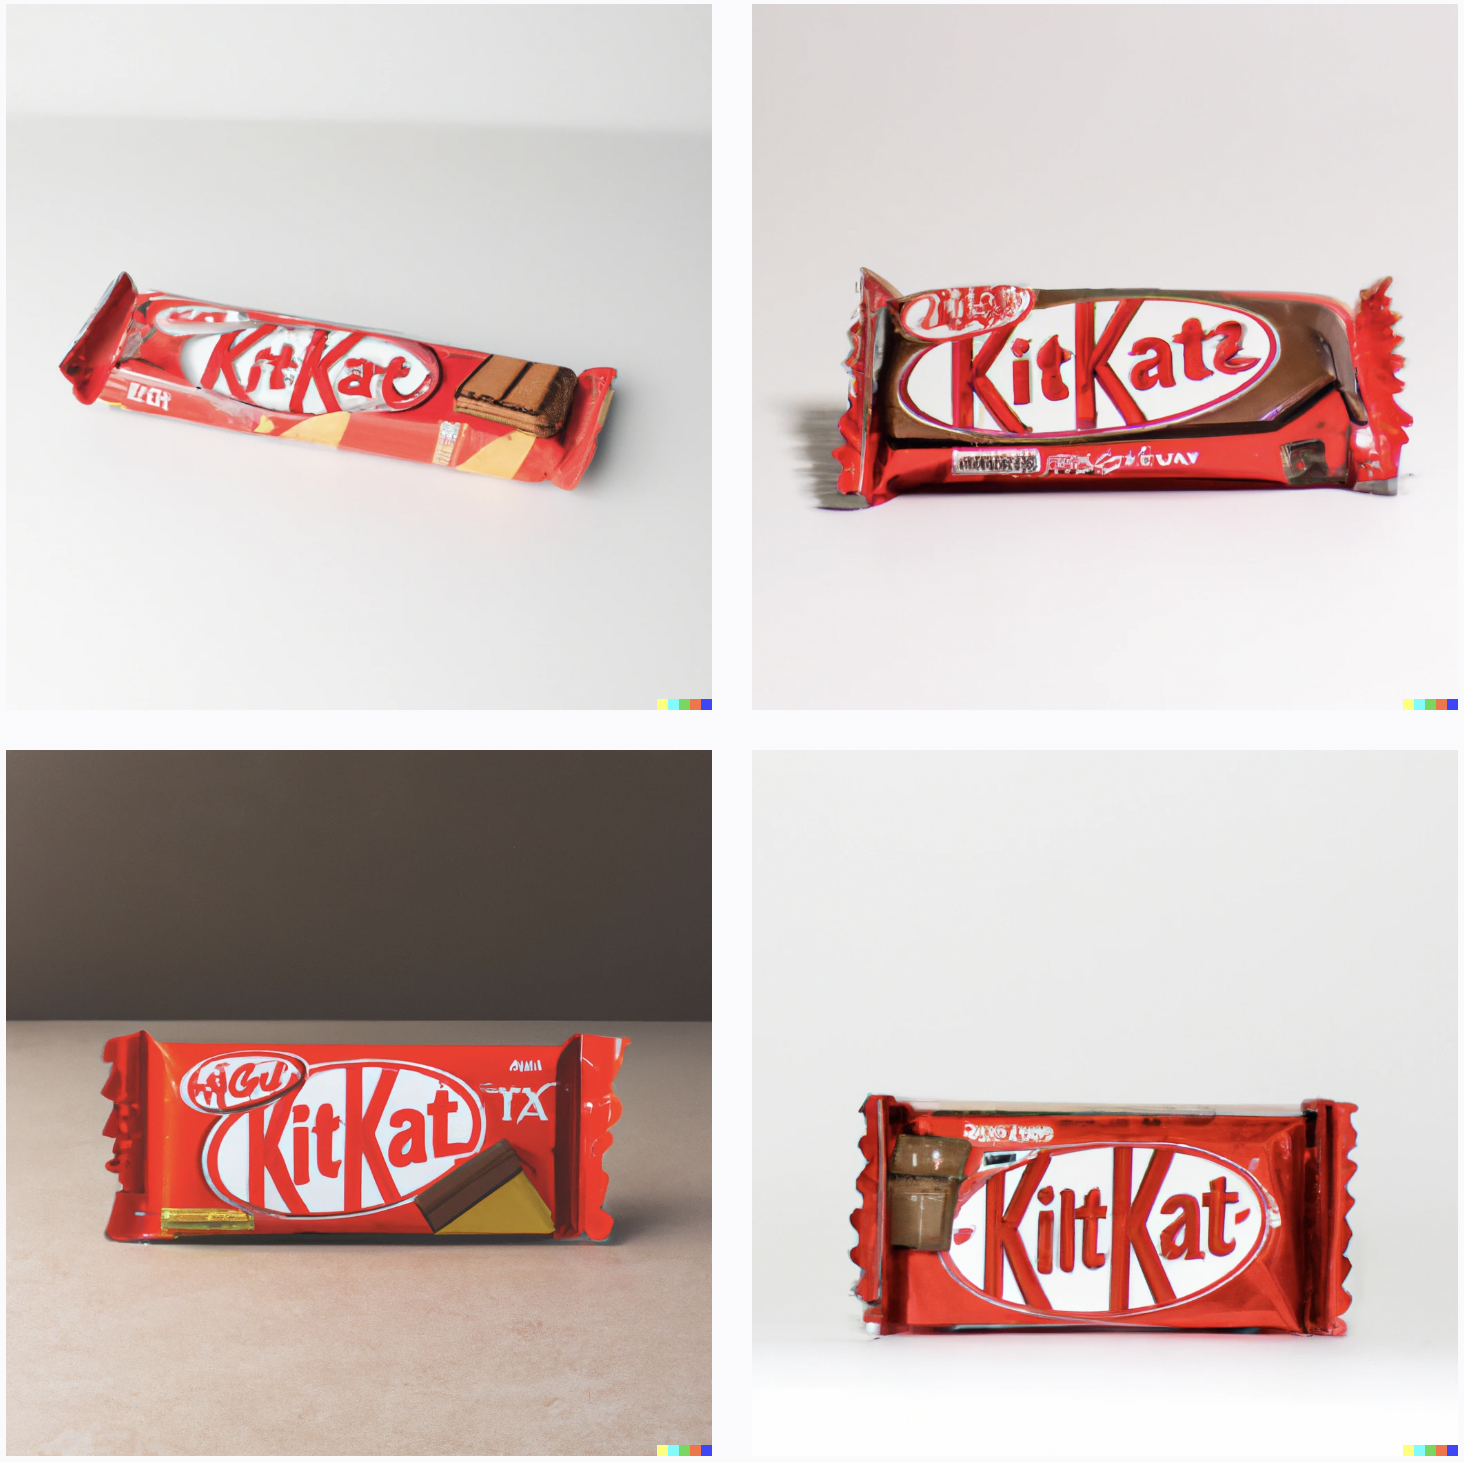 Small candy bars wrapped in an excellent approximation of a kit-kat logo and color scheme. Some of them even read "Kitkat" or "KitKatz" or "Kiltkat"